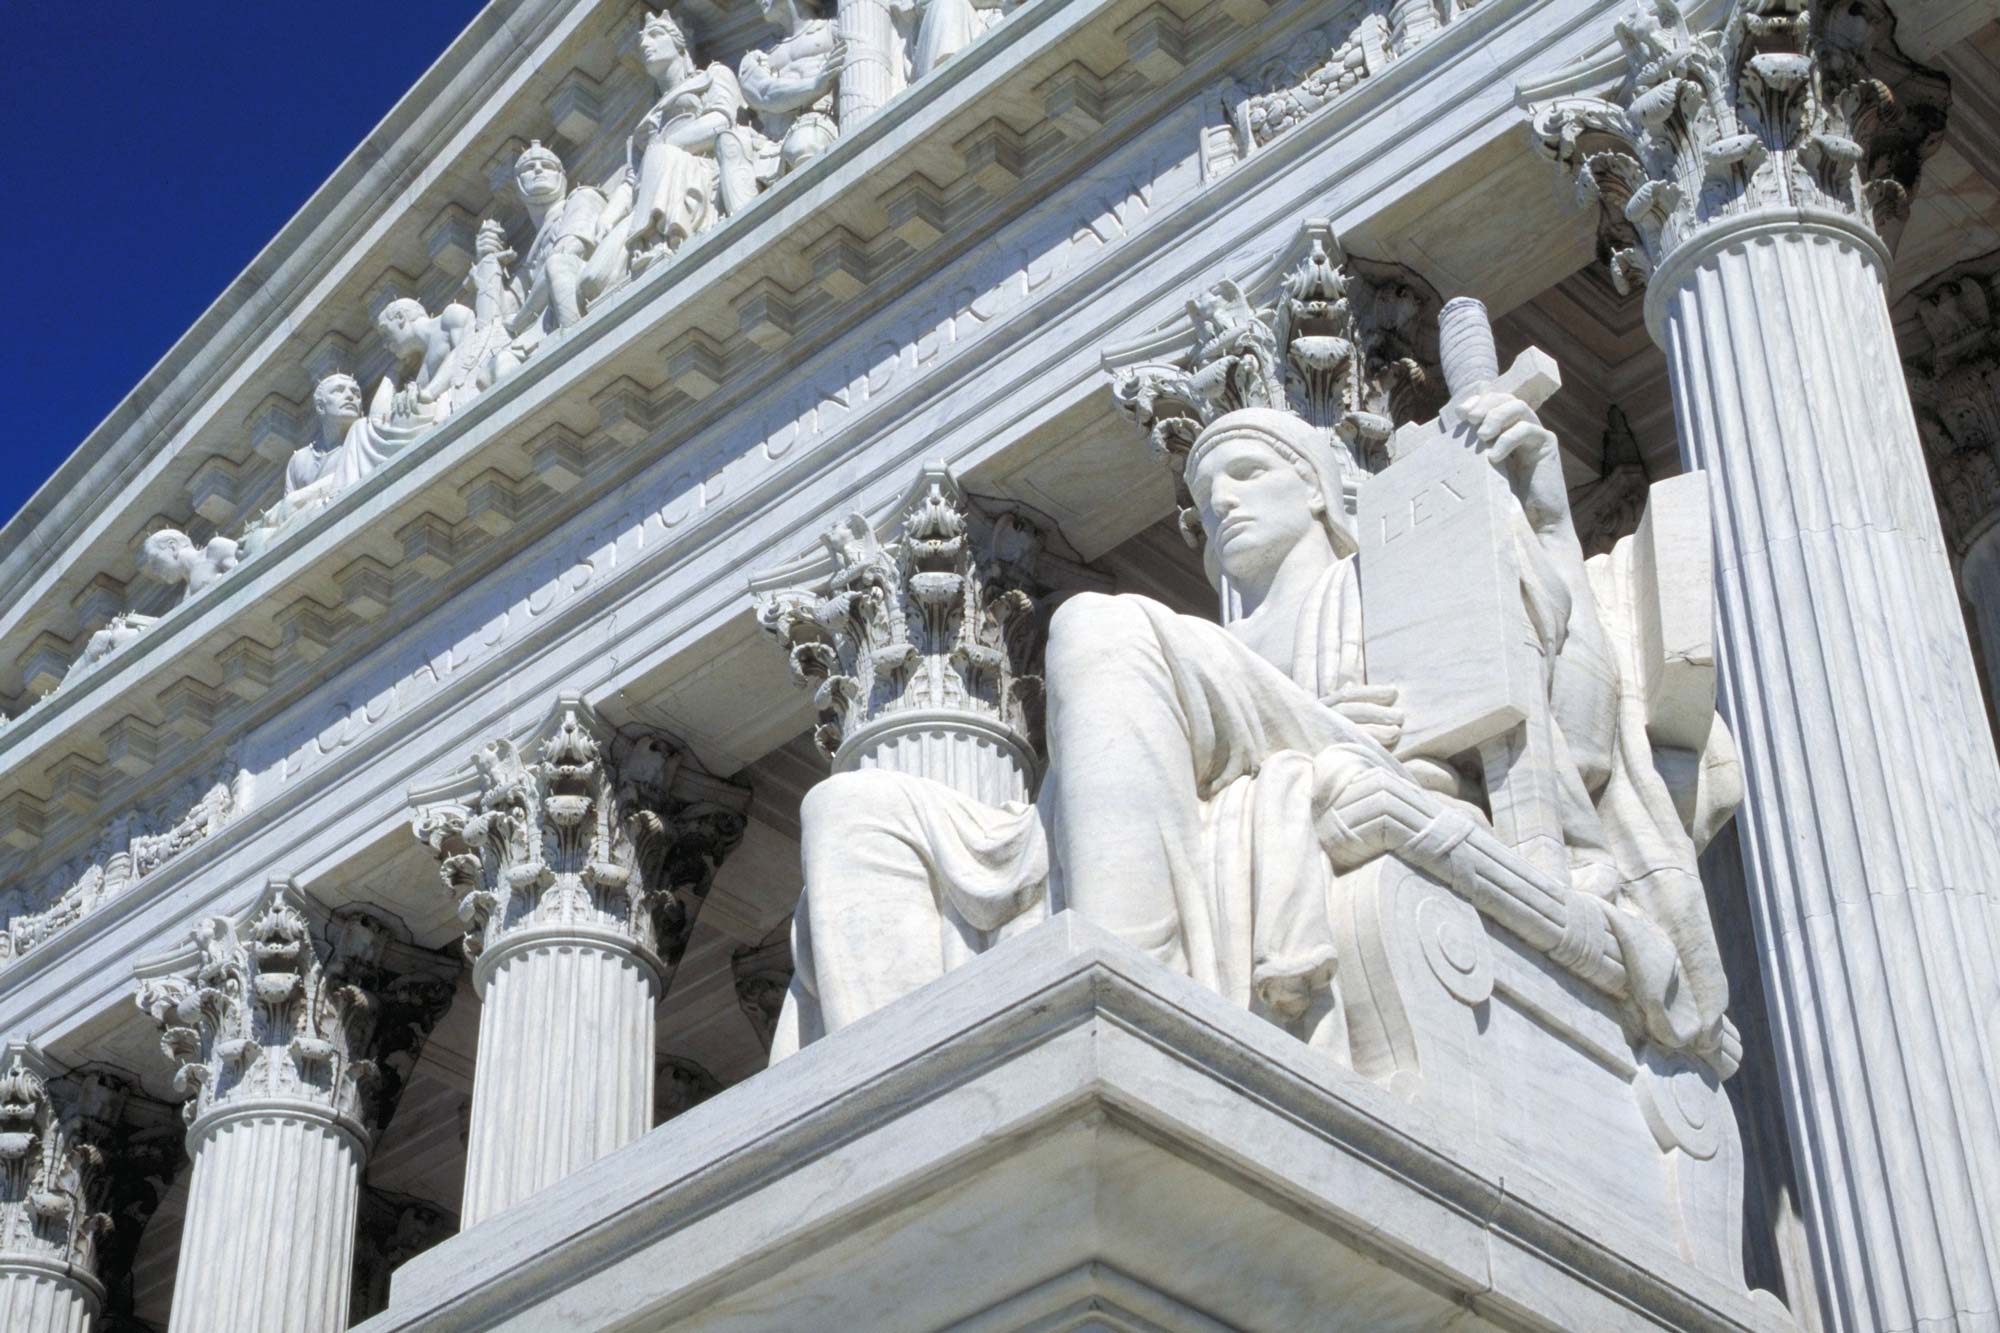 The entrance to the U.S. Supreme Court building